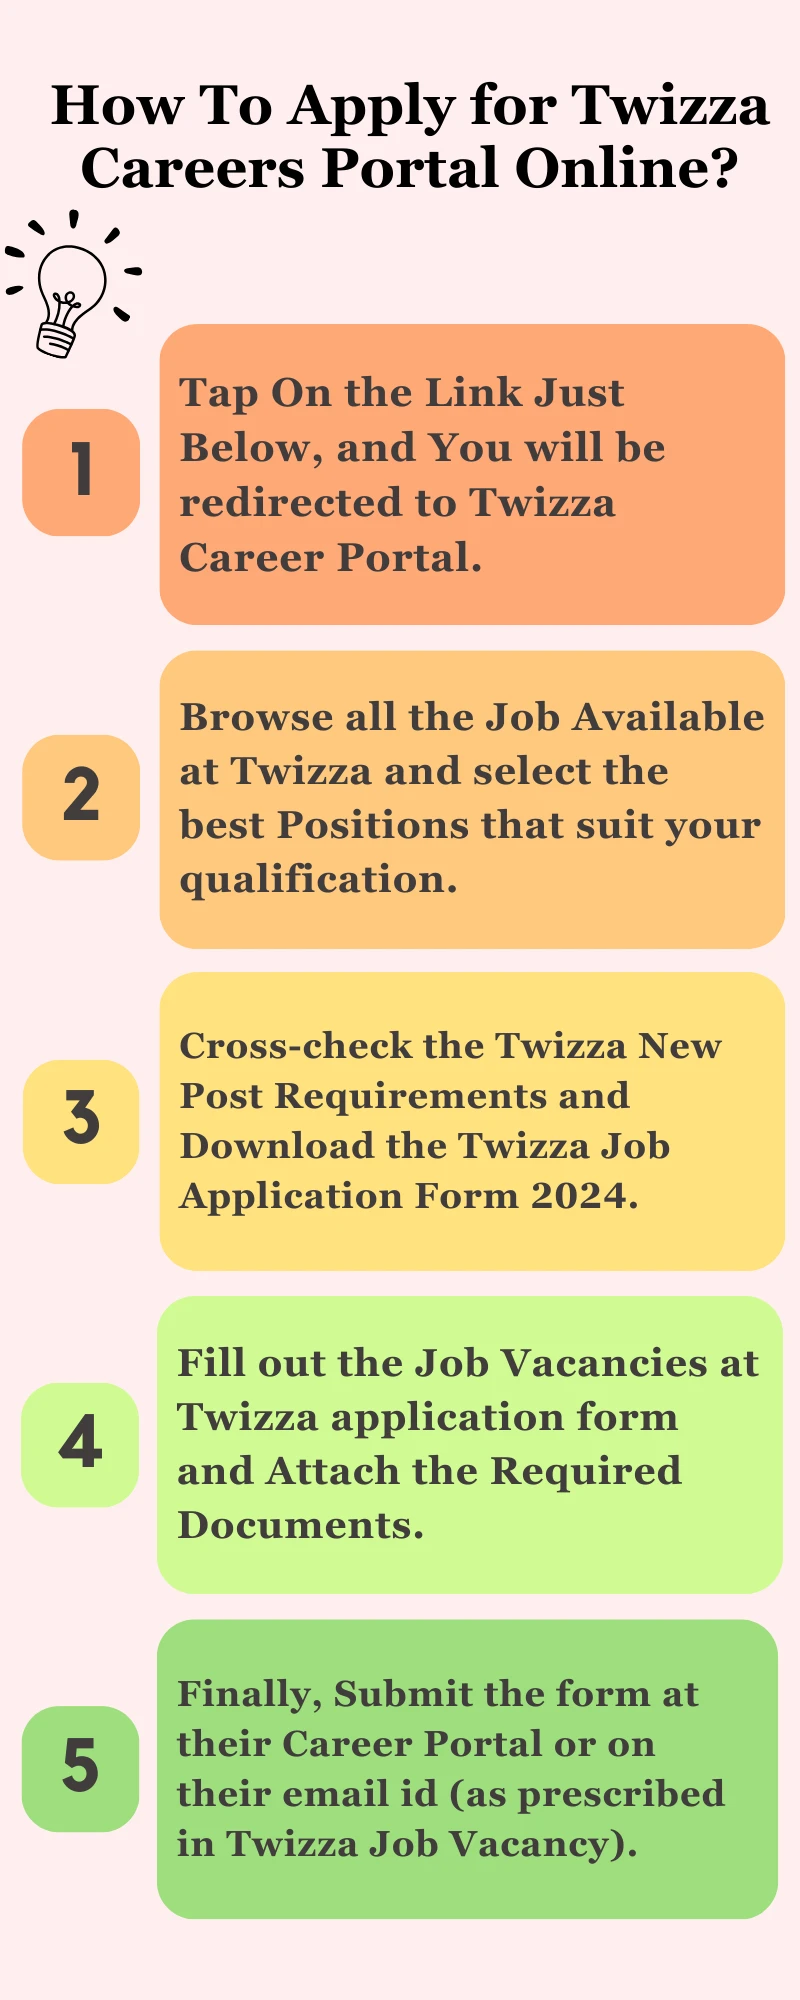 How To Apply for Twizza Careers Portal Online?